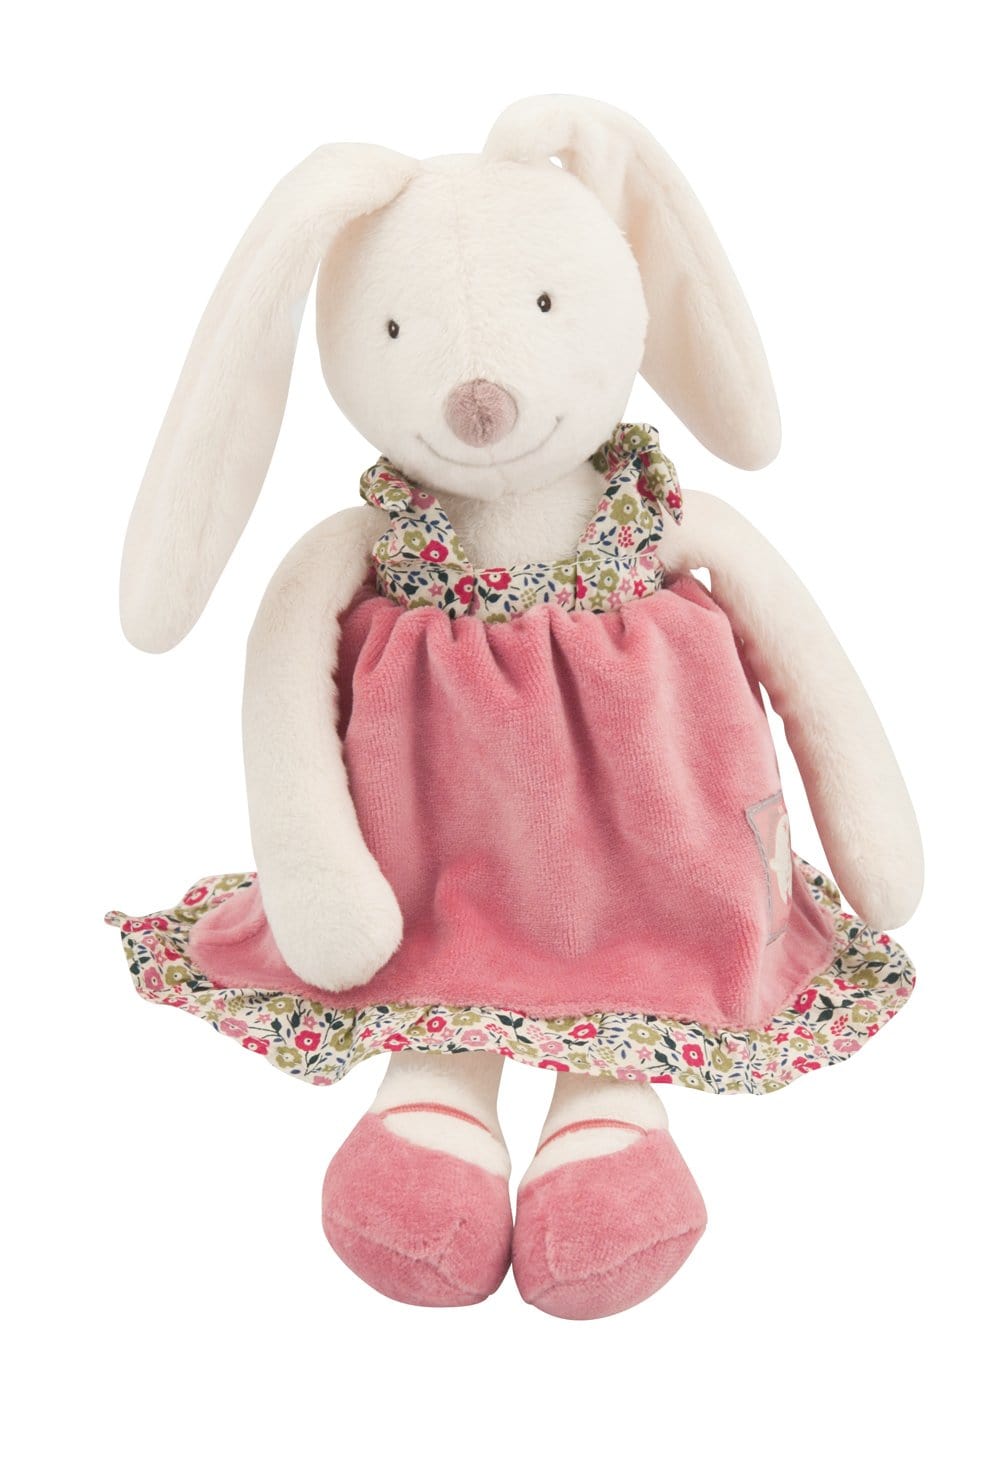 Moulin Roty | Cotton Soft Toy | Myrtille the Bunny in Pink Dress + 4 Changes of Clothes | Size: 30cm | Age: 0+